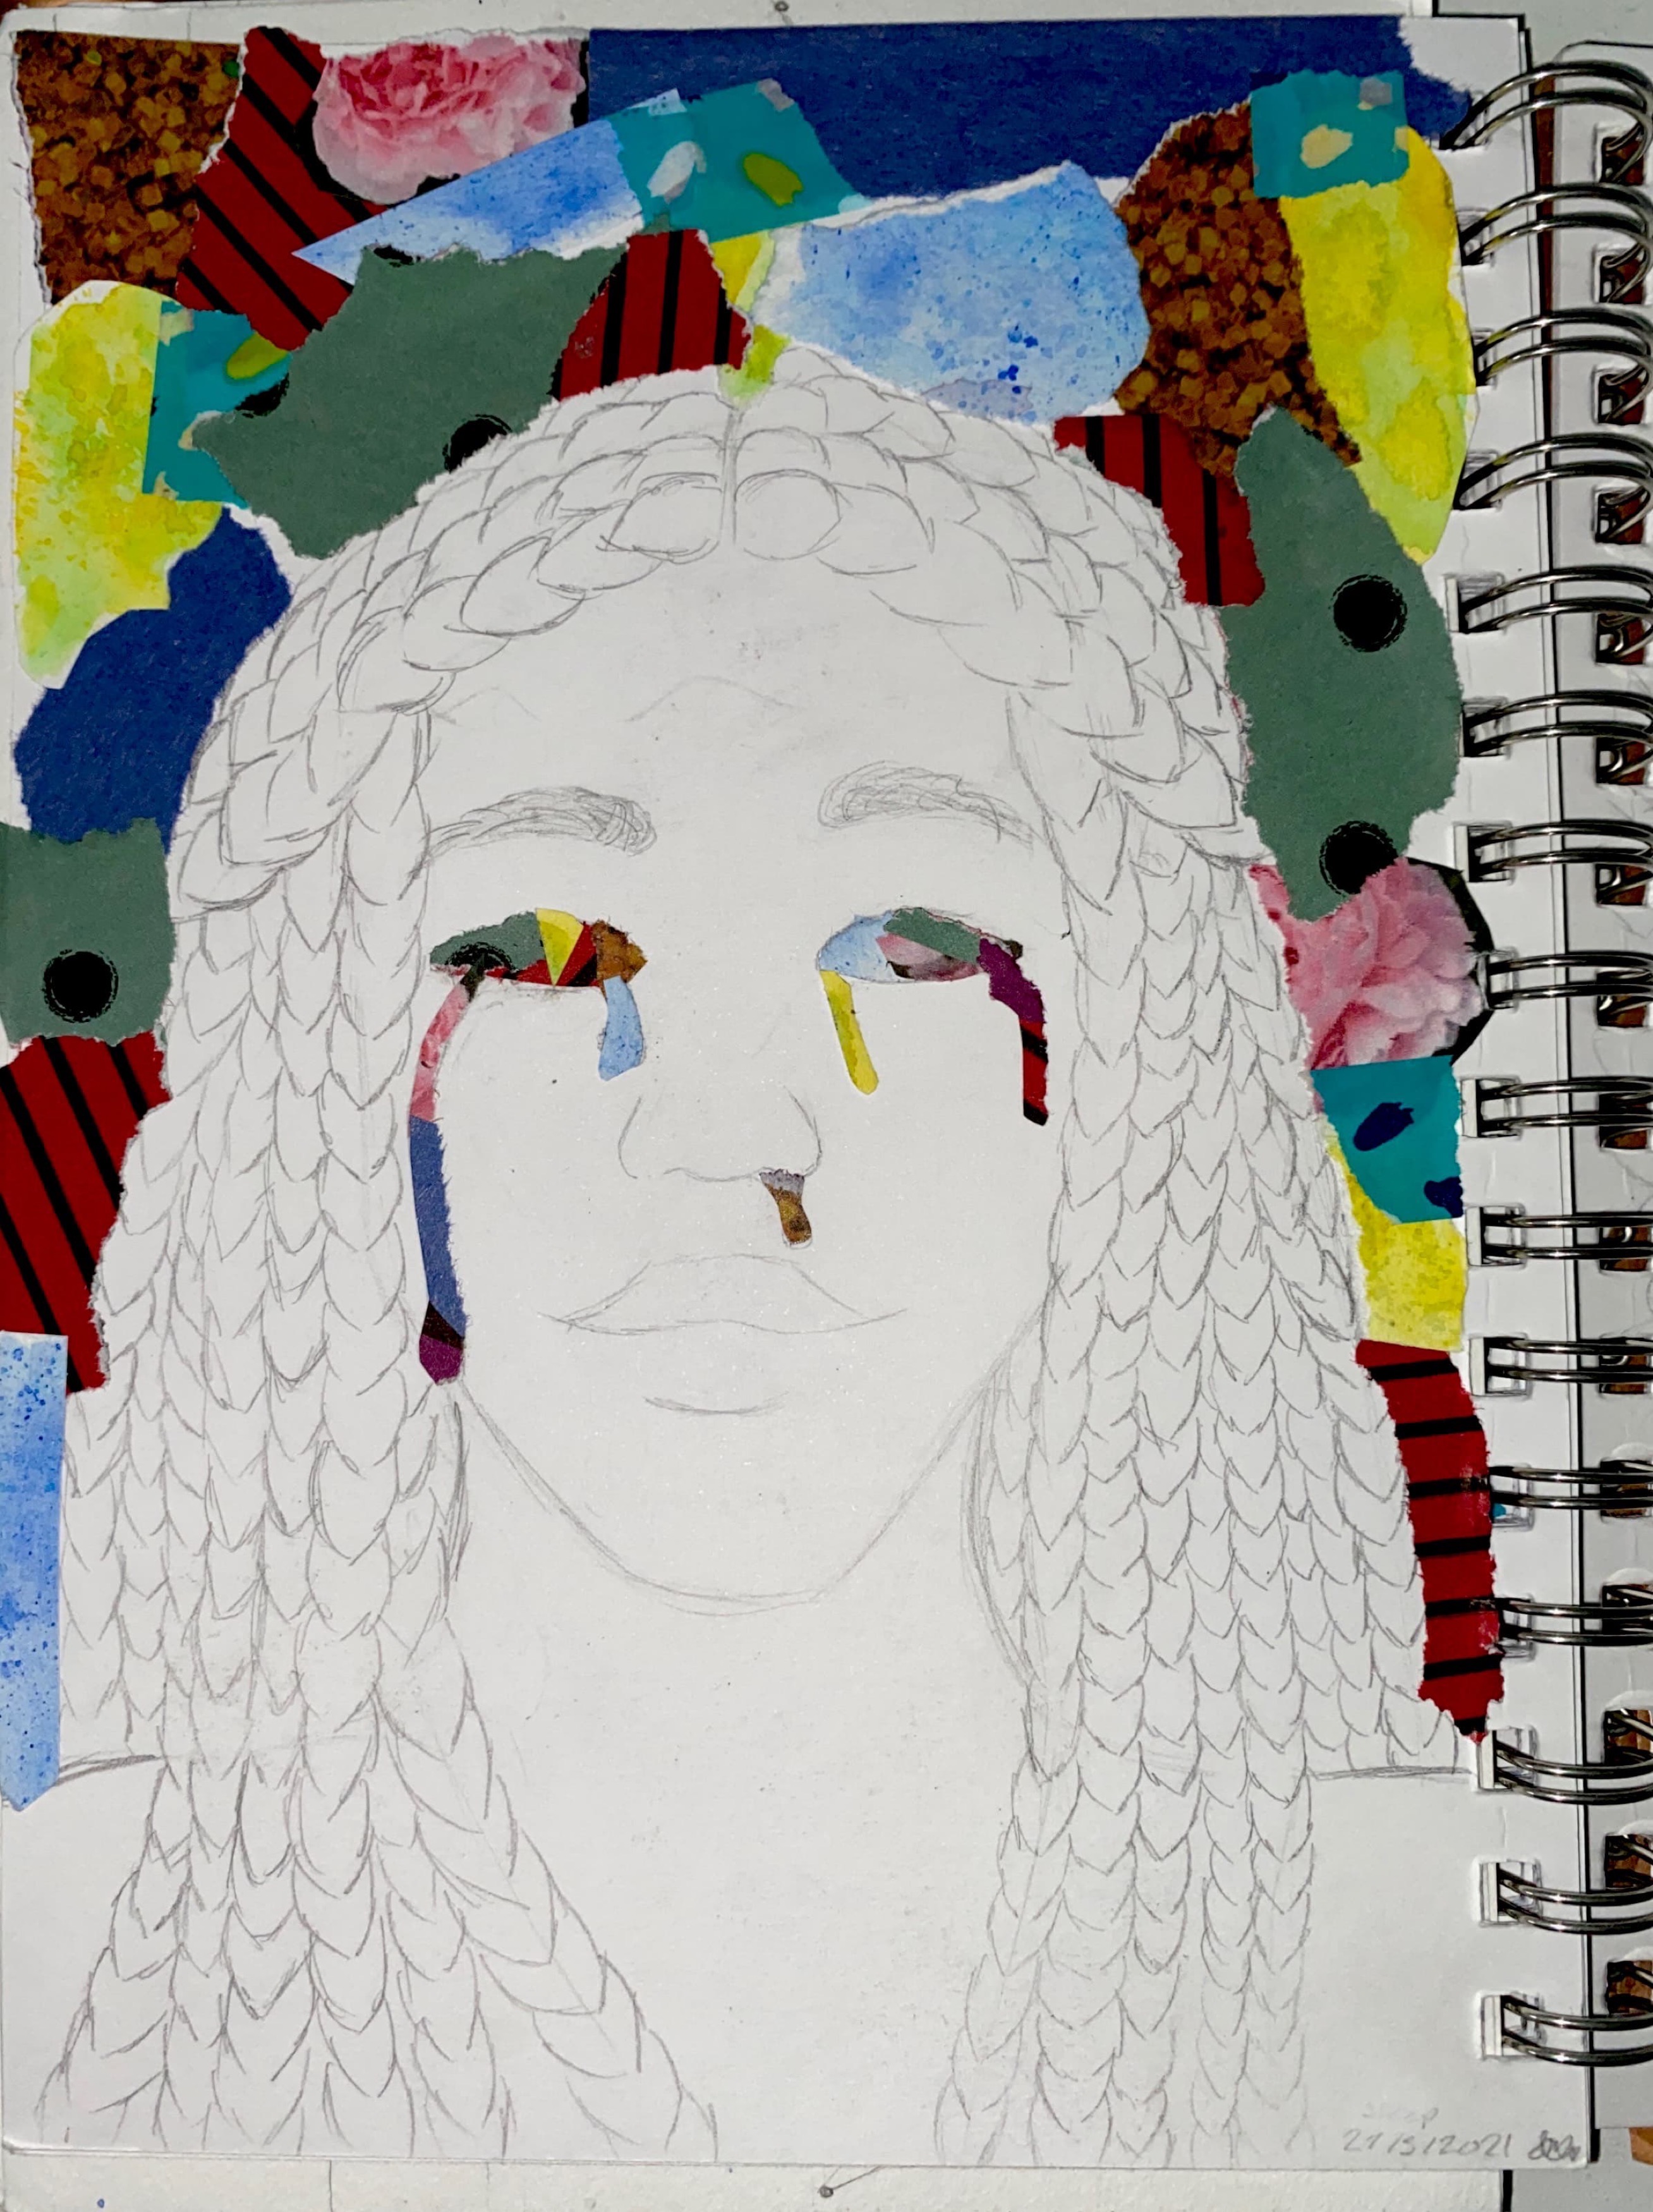 a sketch of a woman. her eyes and the background are filled with a colourful collage